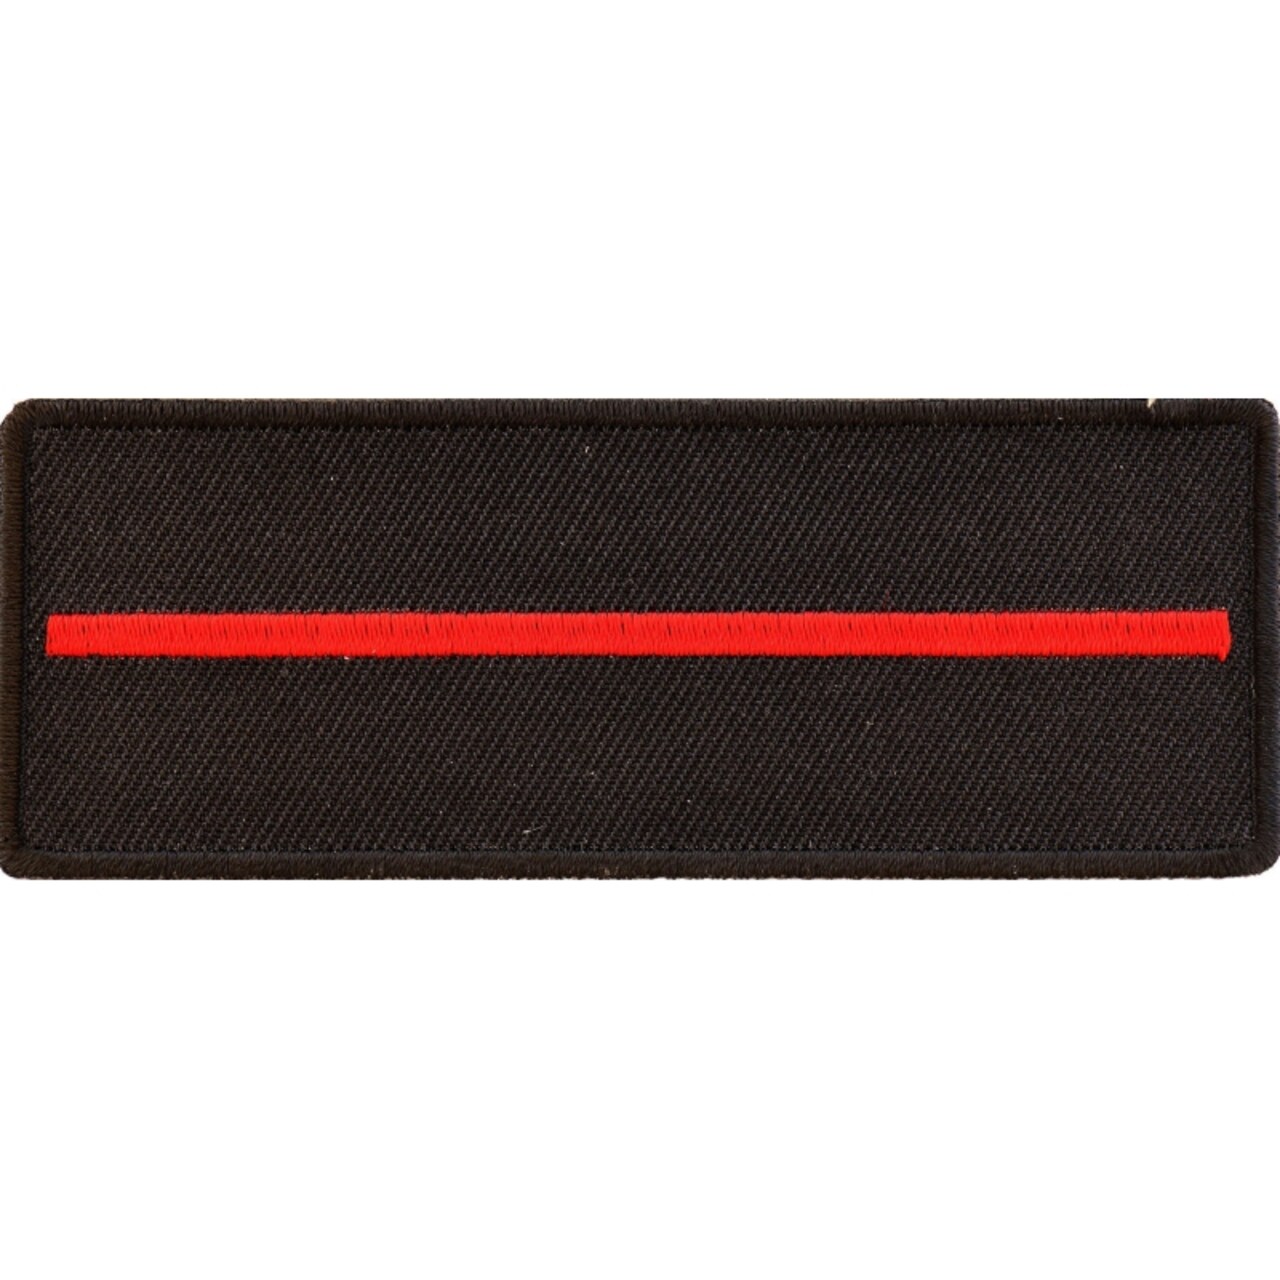 Patch, Embroidered Patch (Iron-On or Sew-On), Thin Red Line